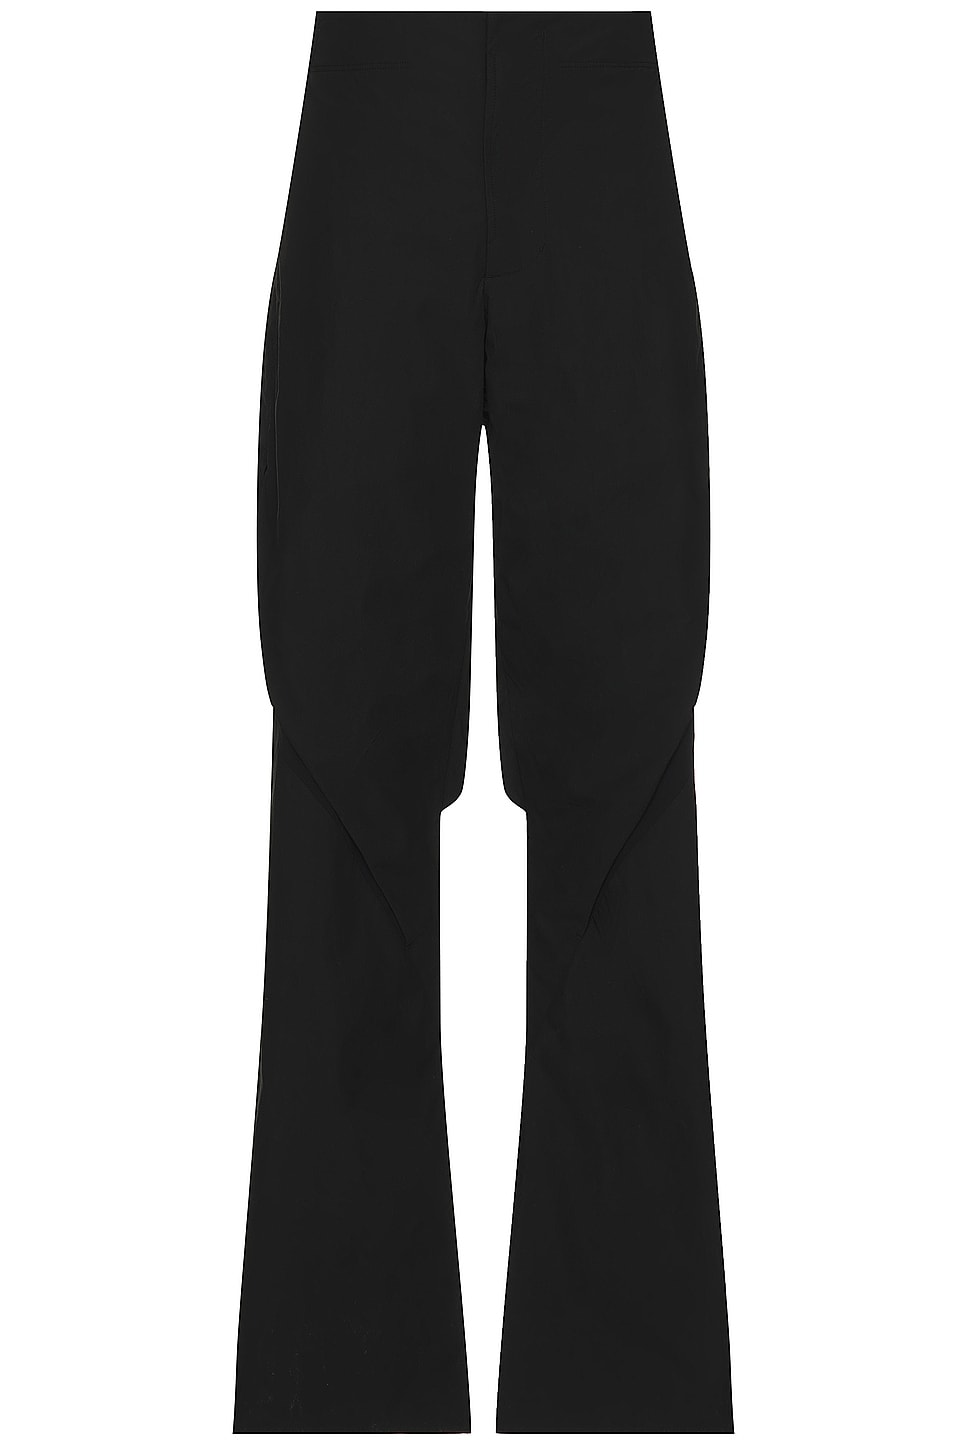 Image 1 of POST ARCHIVE FACTION (PAF) 6.0 Technical Pants in Black